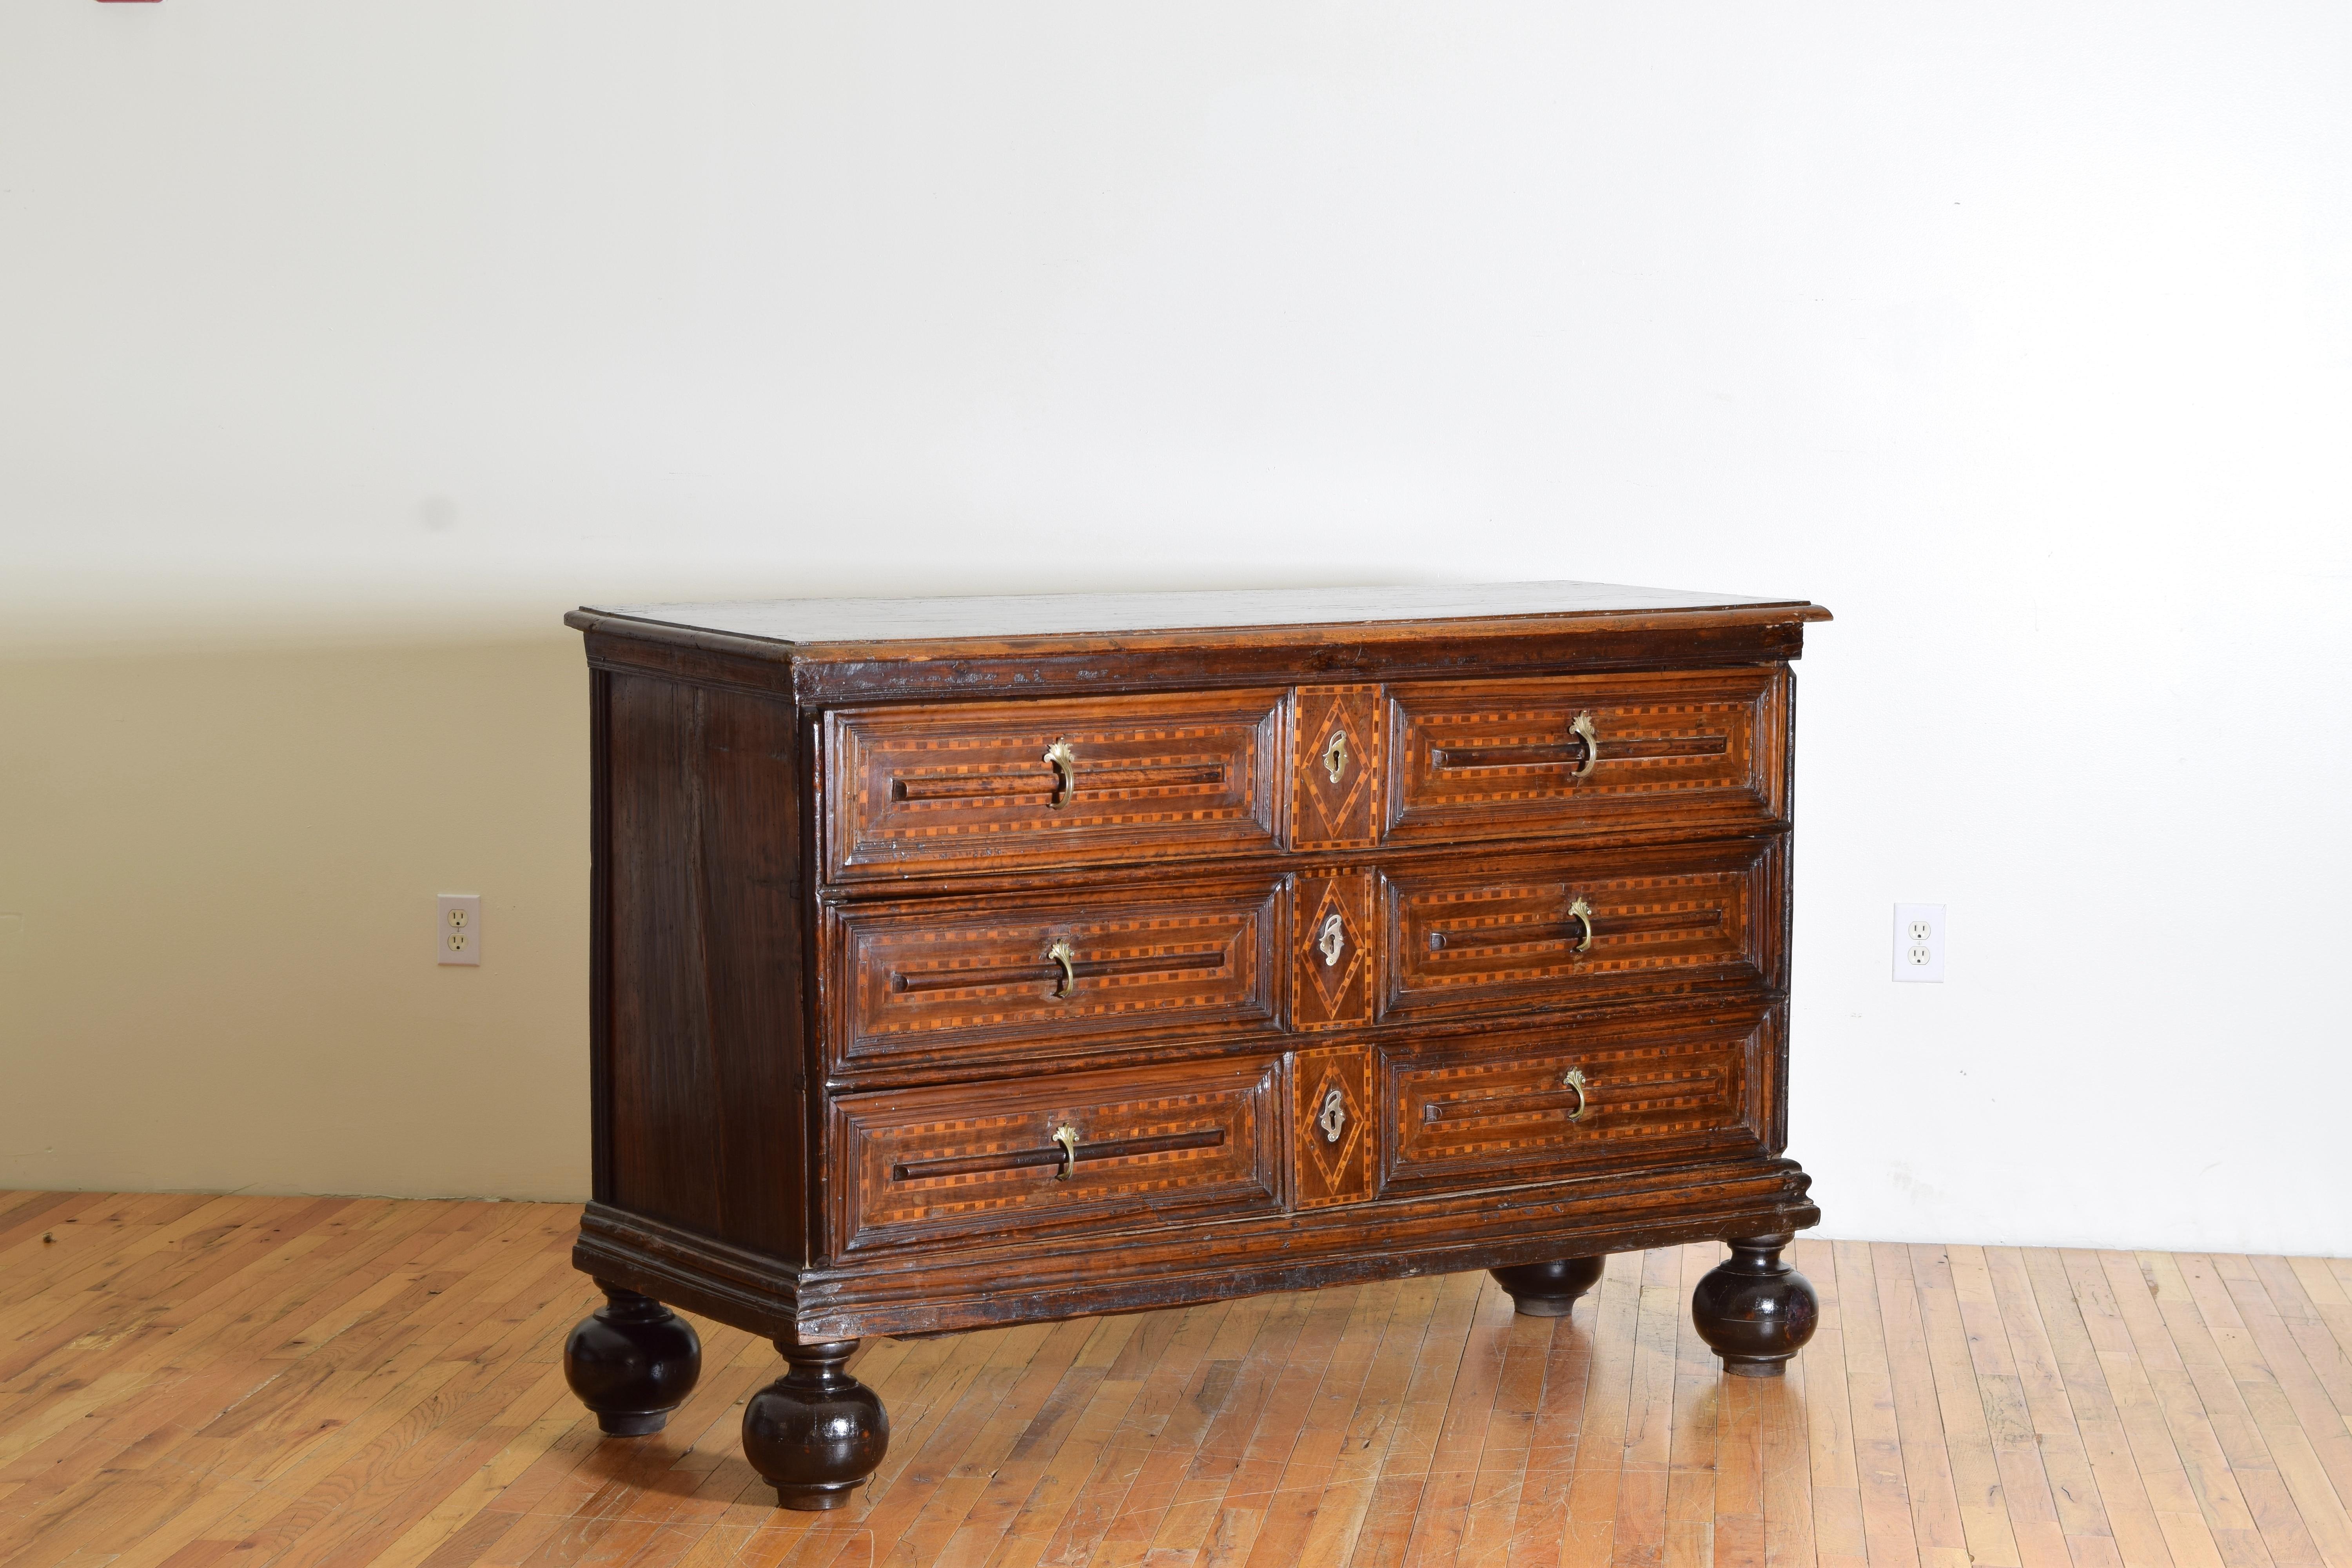 Constructed in the village of Bassano del Grappa in the Veneto region of Italy this rare and exceptional commode has a rectangular top with a modest molded edge atop a conforming case housing three drawers all with alternating rectangular inlays of